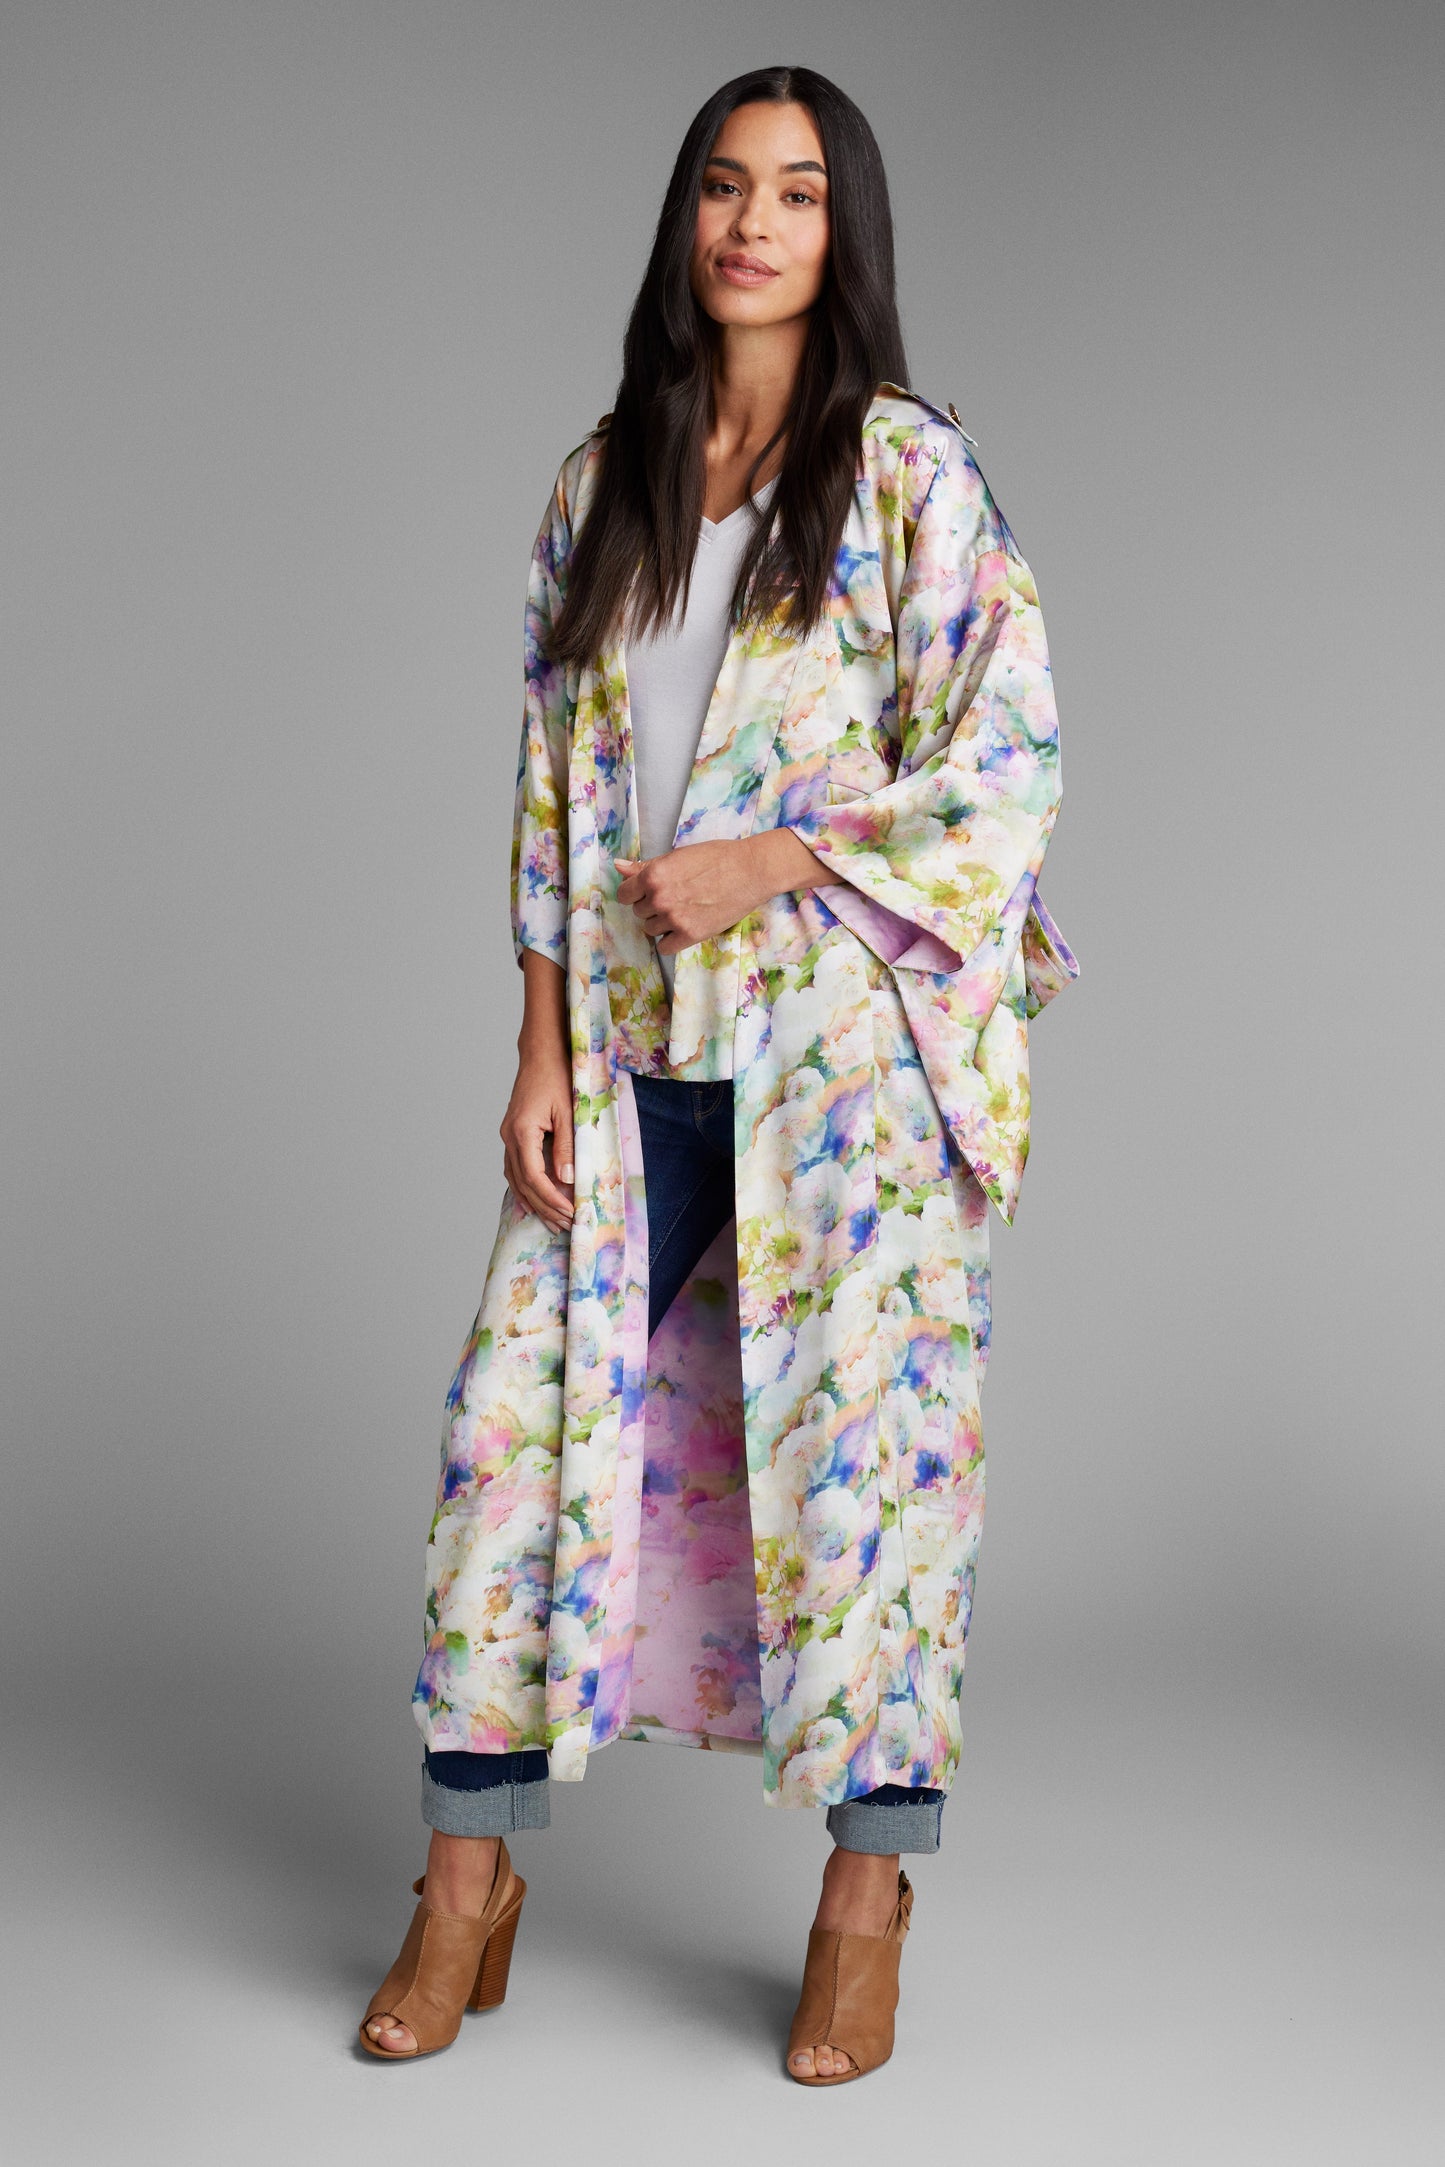 Front profile of woman wearing an all over floral printed kimono duster made from recycled textiles